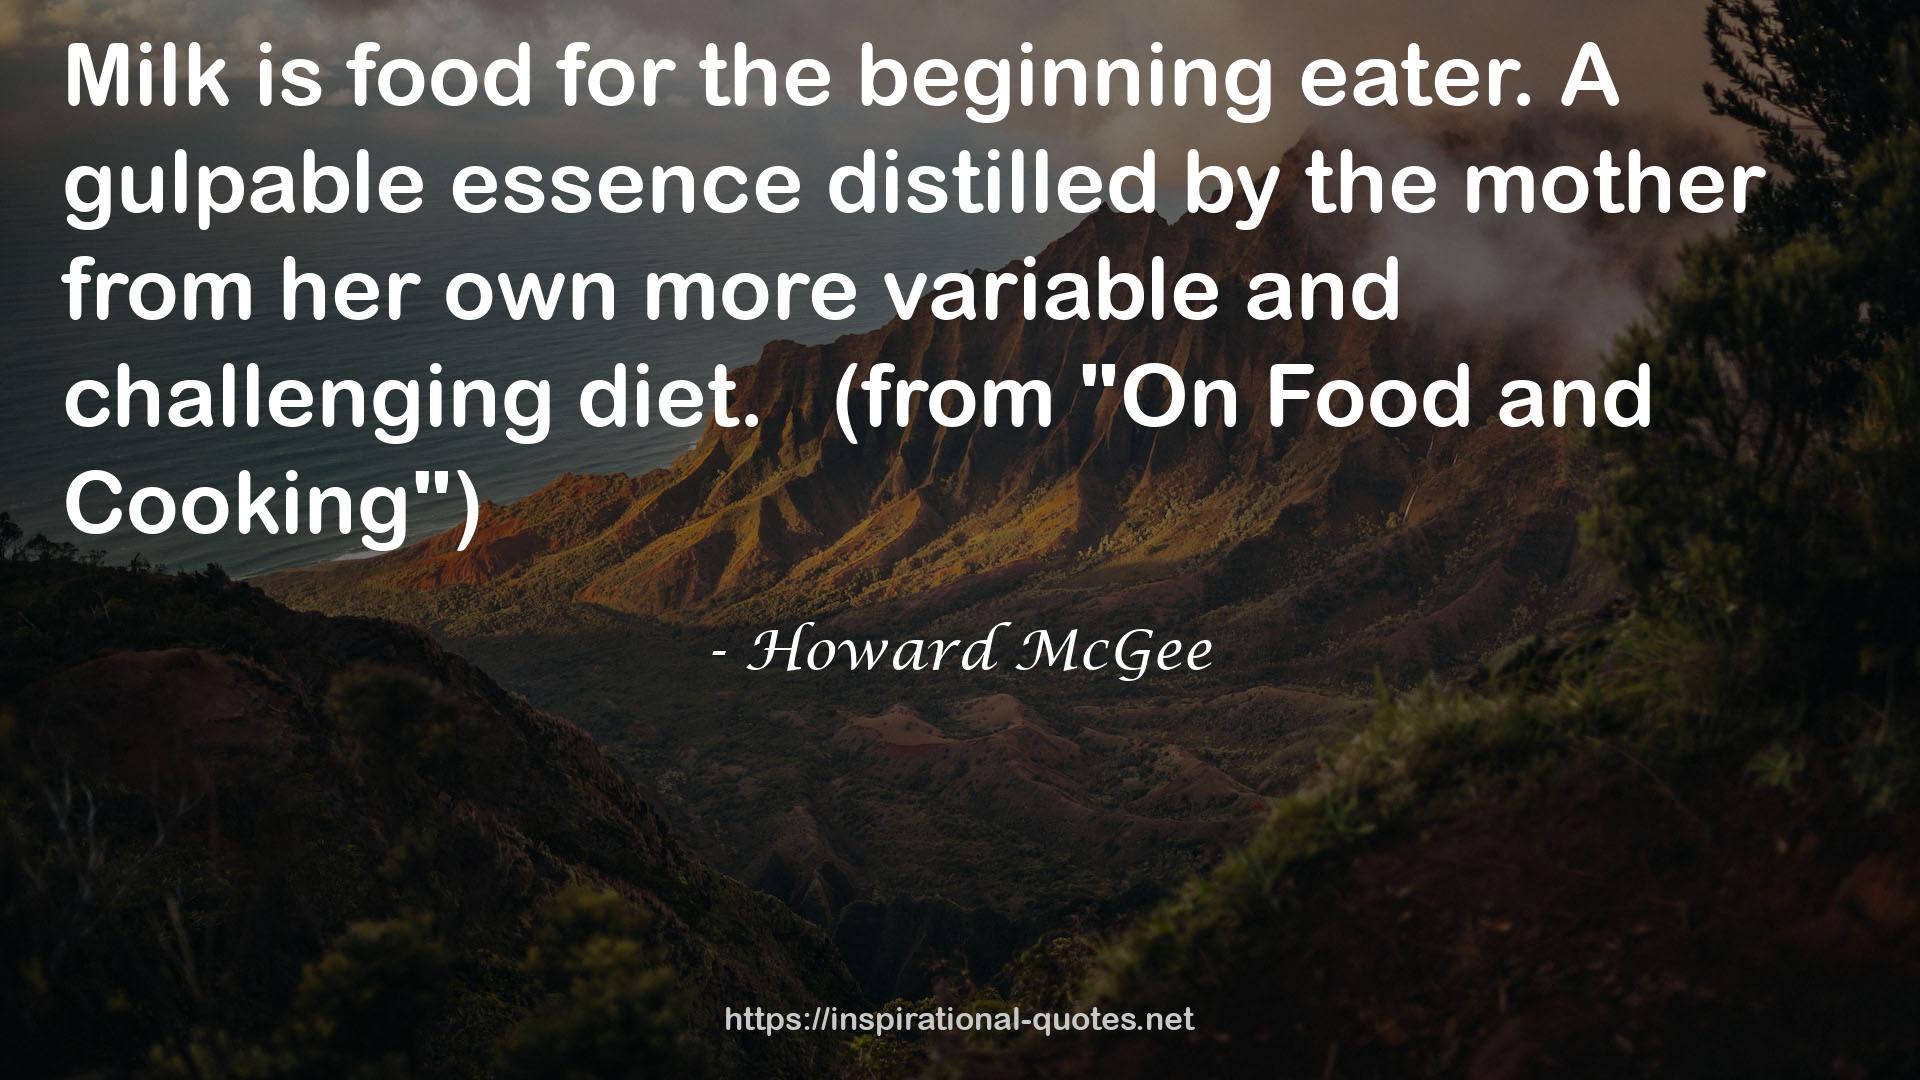 Howard McGee QUOTES